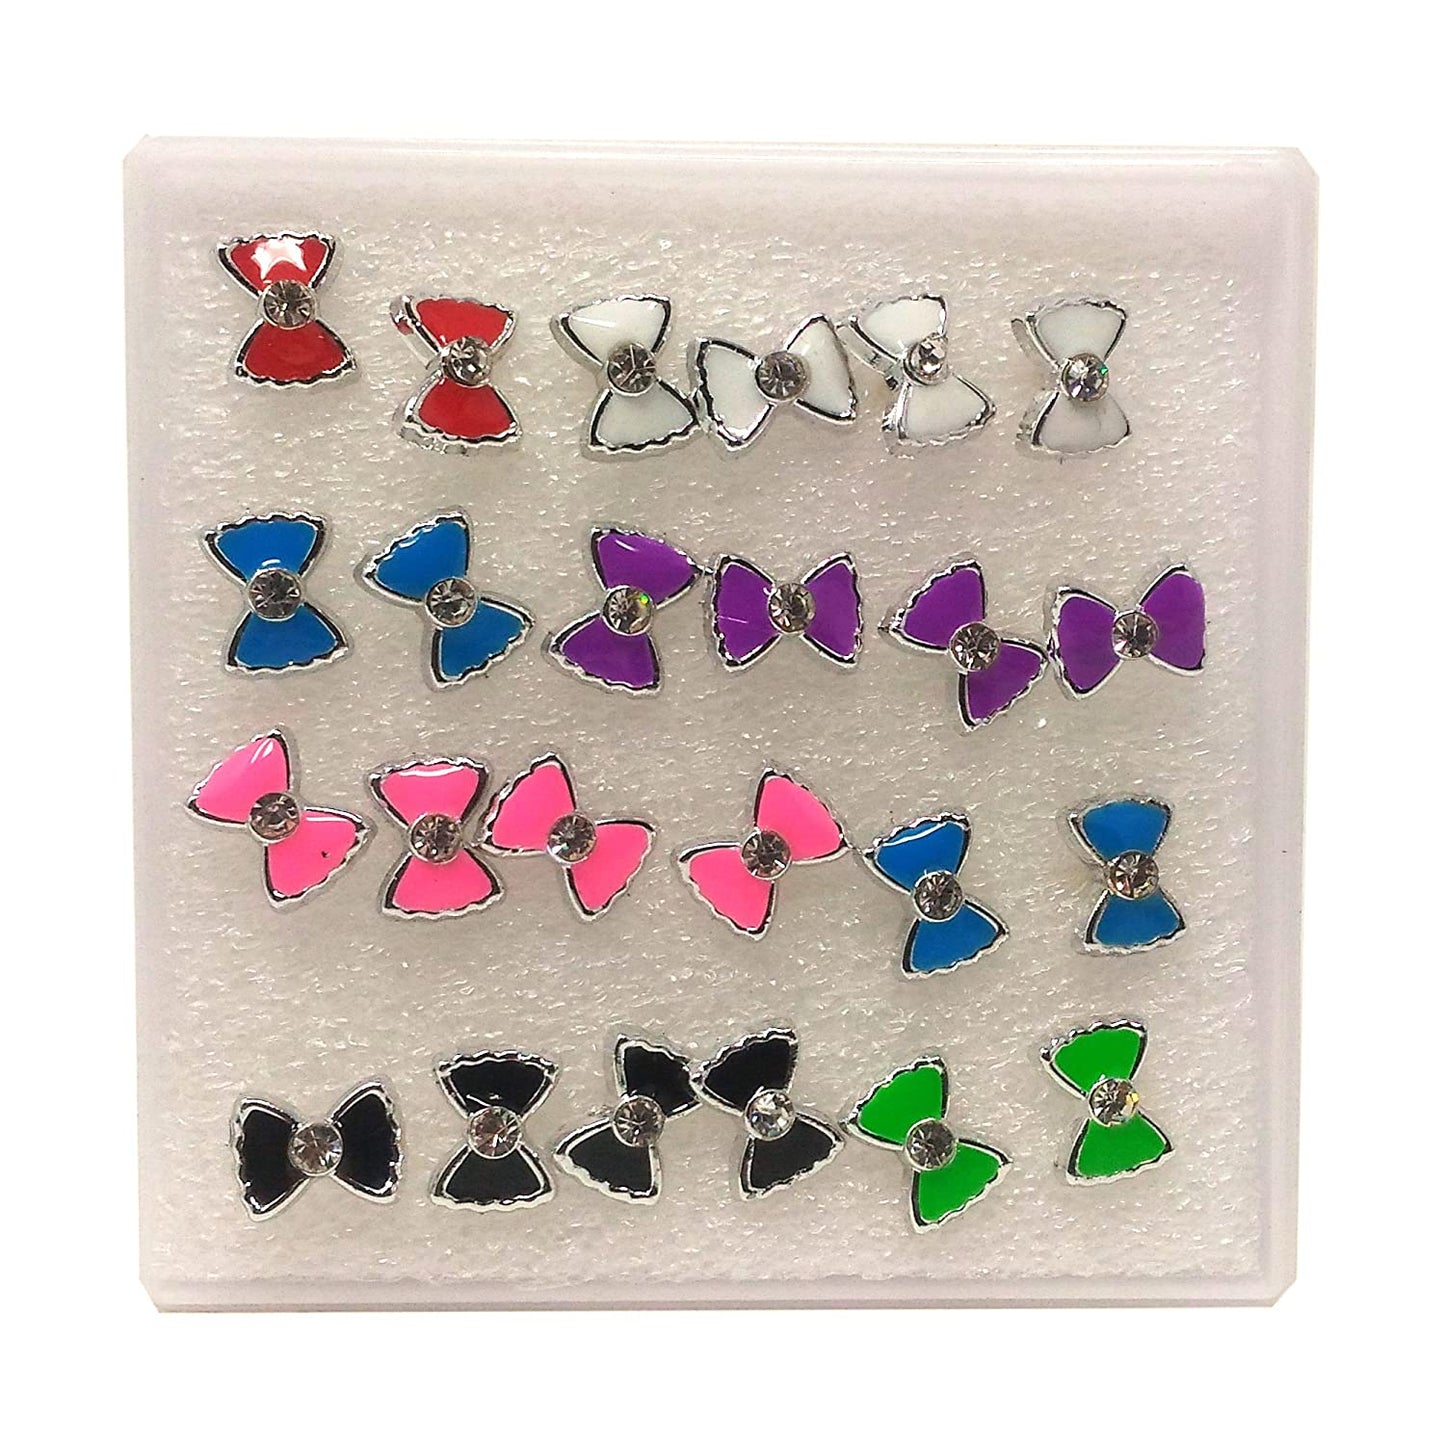 Anokhi ADA Multi-colour Rhinestone Studded Bow Plastic Stud Earrings for Girls and Women (Pack of 12 Pairs)-(AR-12)